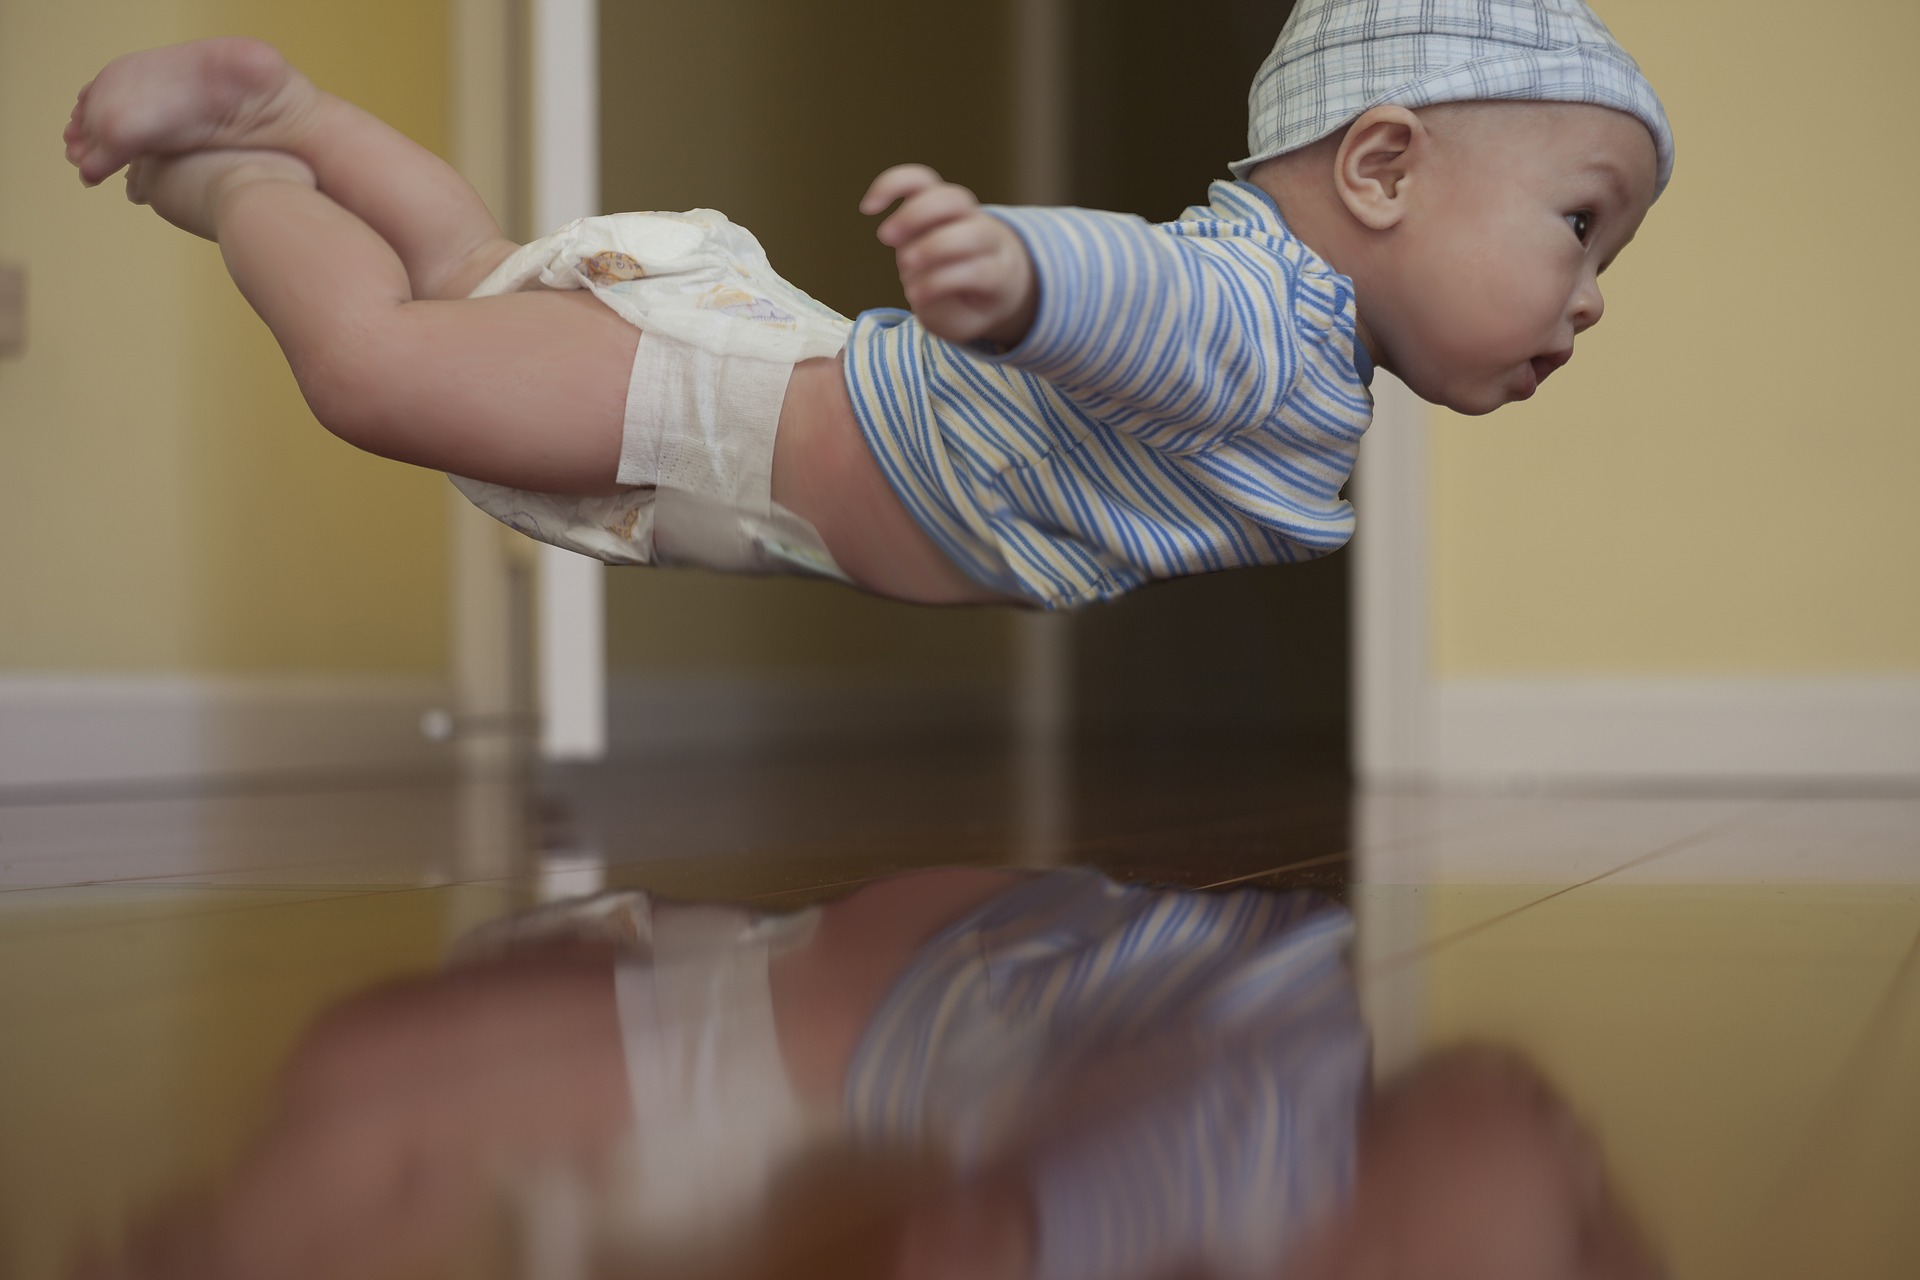 A baby dressed in a shirt, diapers, and cap, floats mid-air.